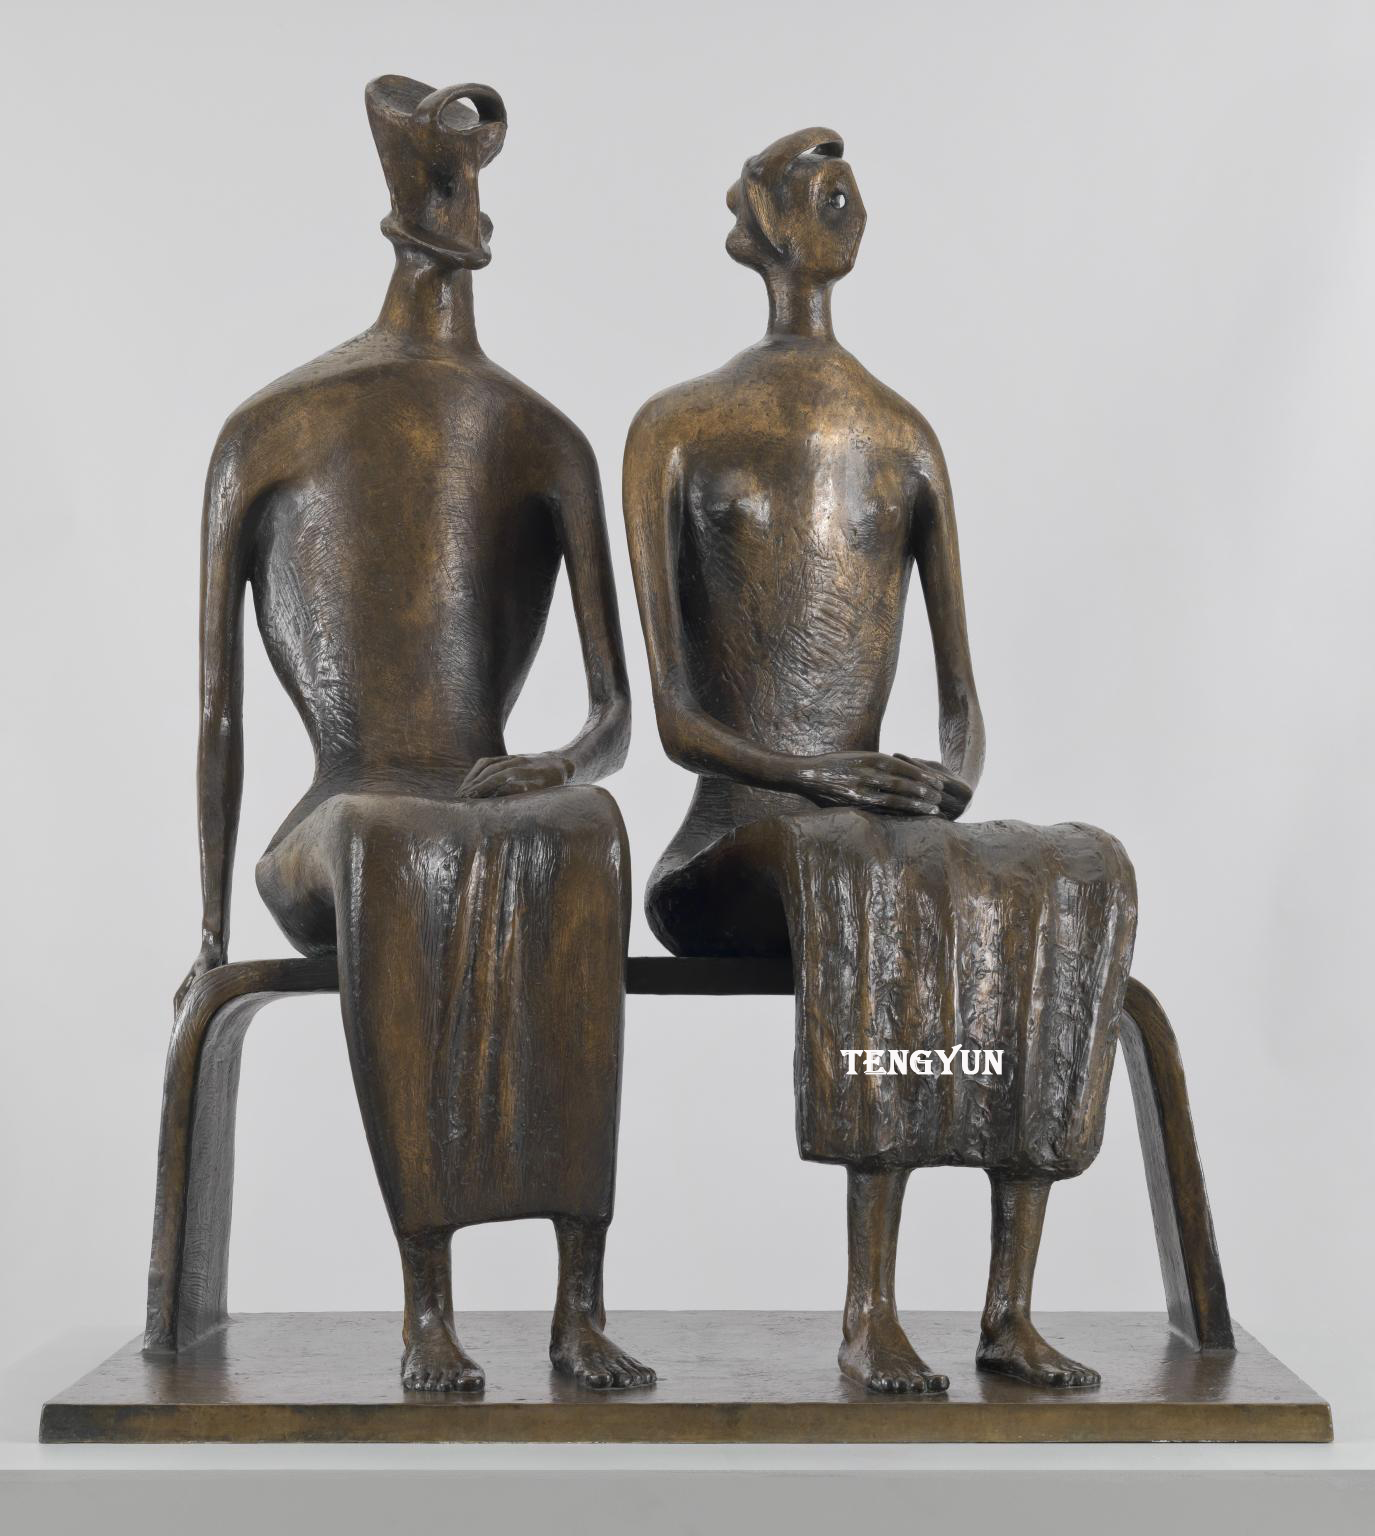 King and Queen 1952-3, cast 1957 Henry Moore OM, CH 1898-1986 Presented by the Friends of the Tate Gallery with funds provided by Associated Rediffusion Ltd 1959 http://www.tate.org.uk/art/work/T00228